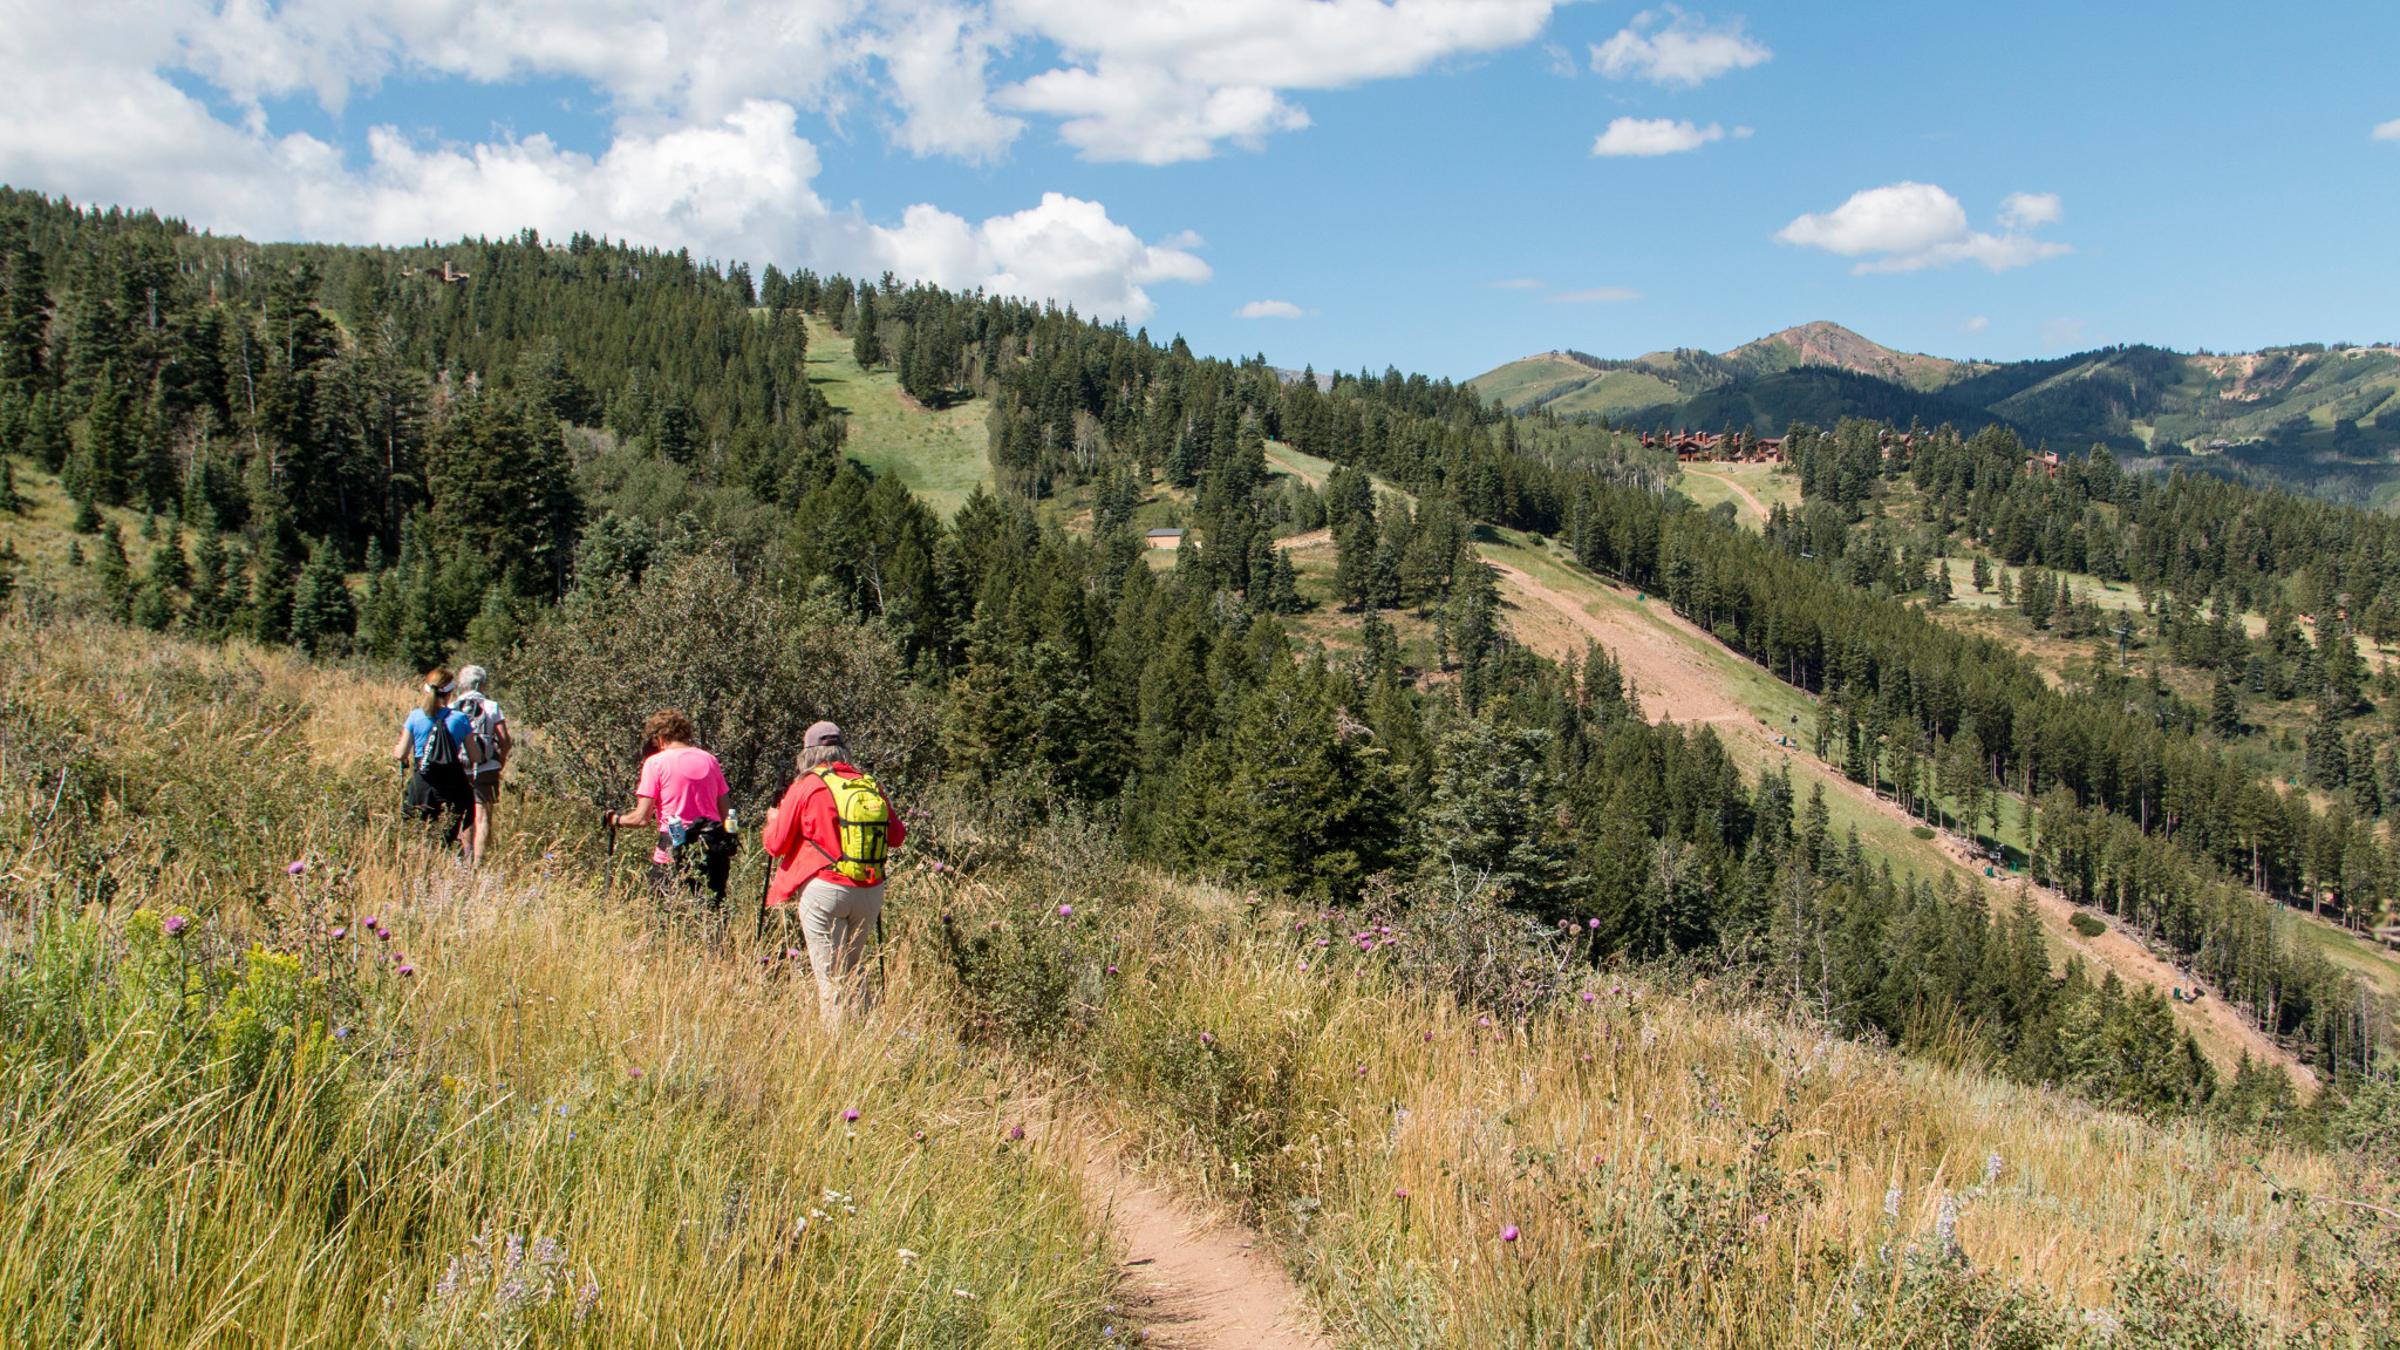 A group of guests on a guided hike at Deer Valley Resort with ski runs in the background